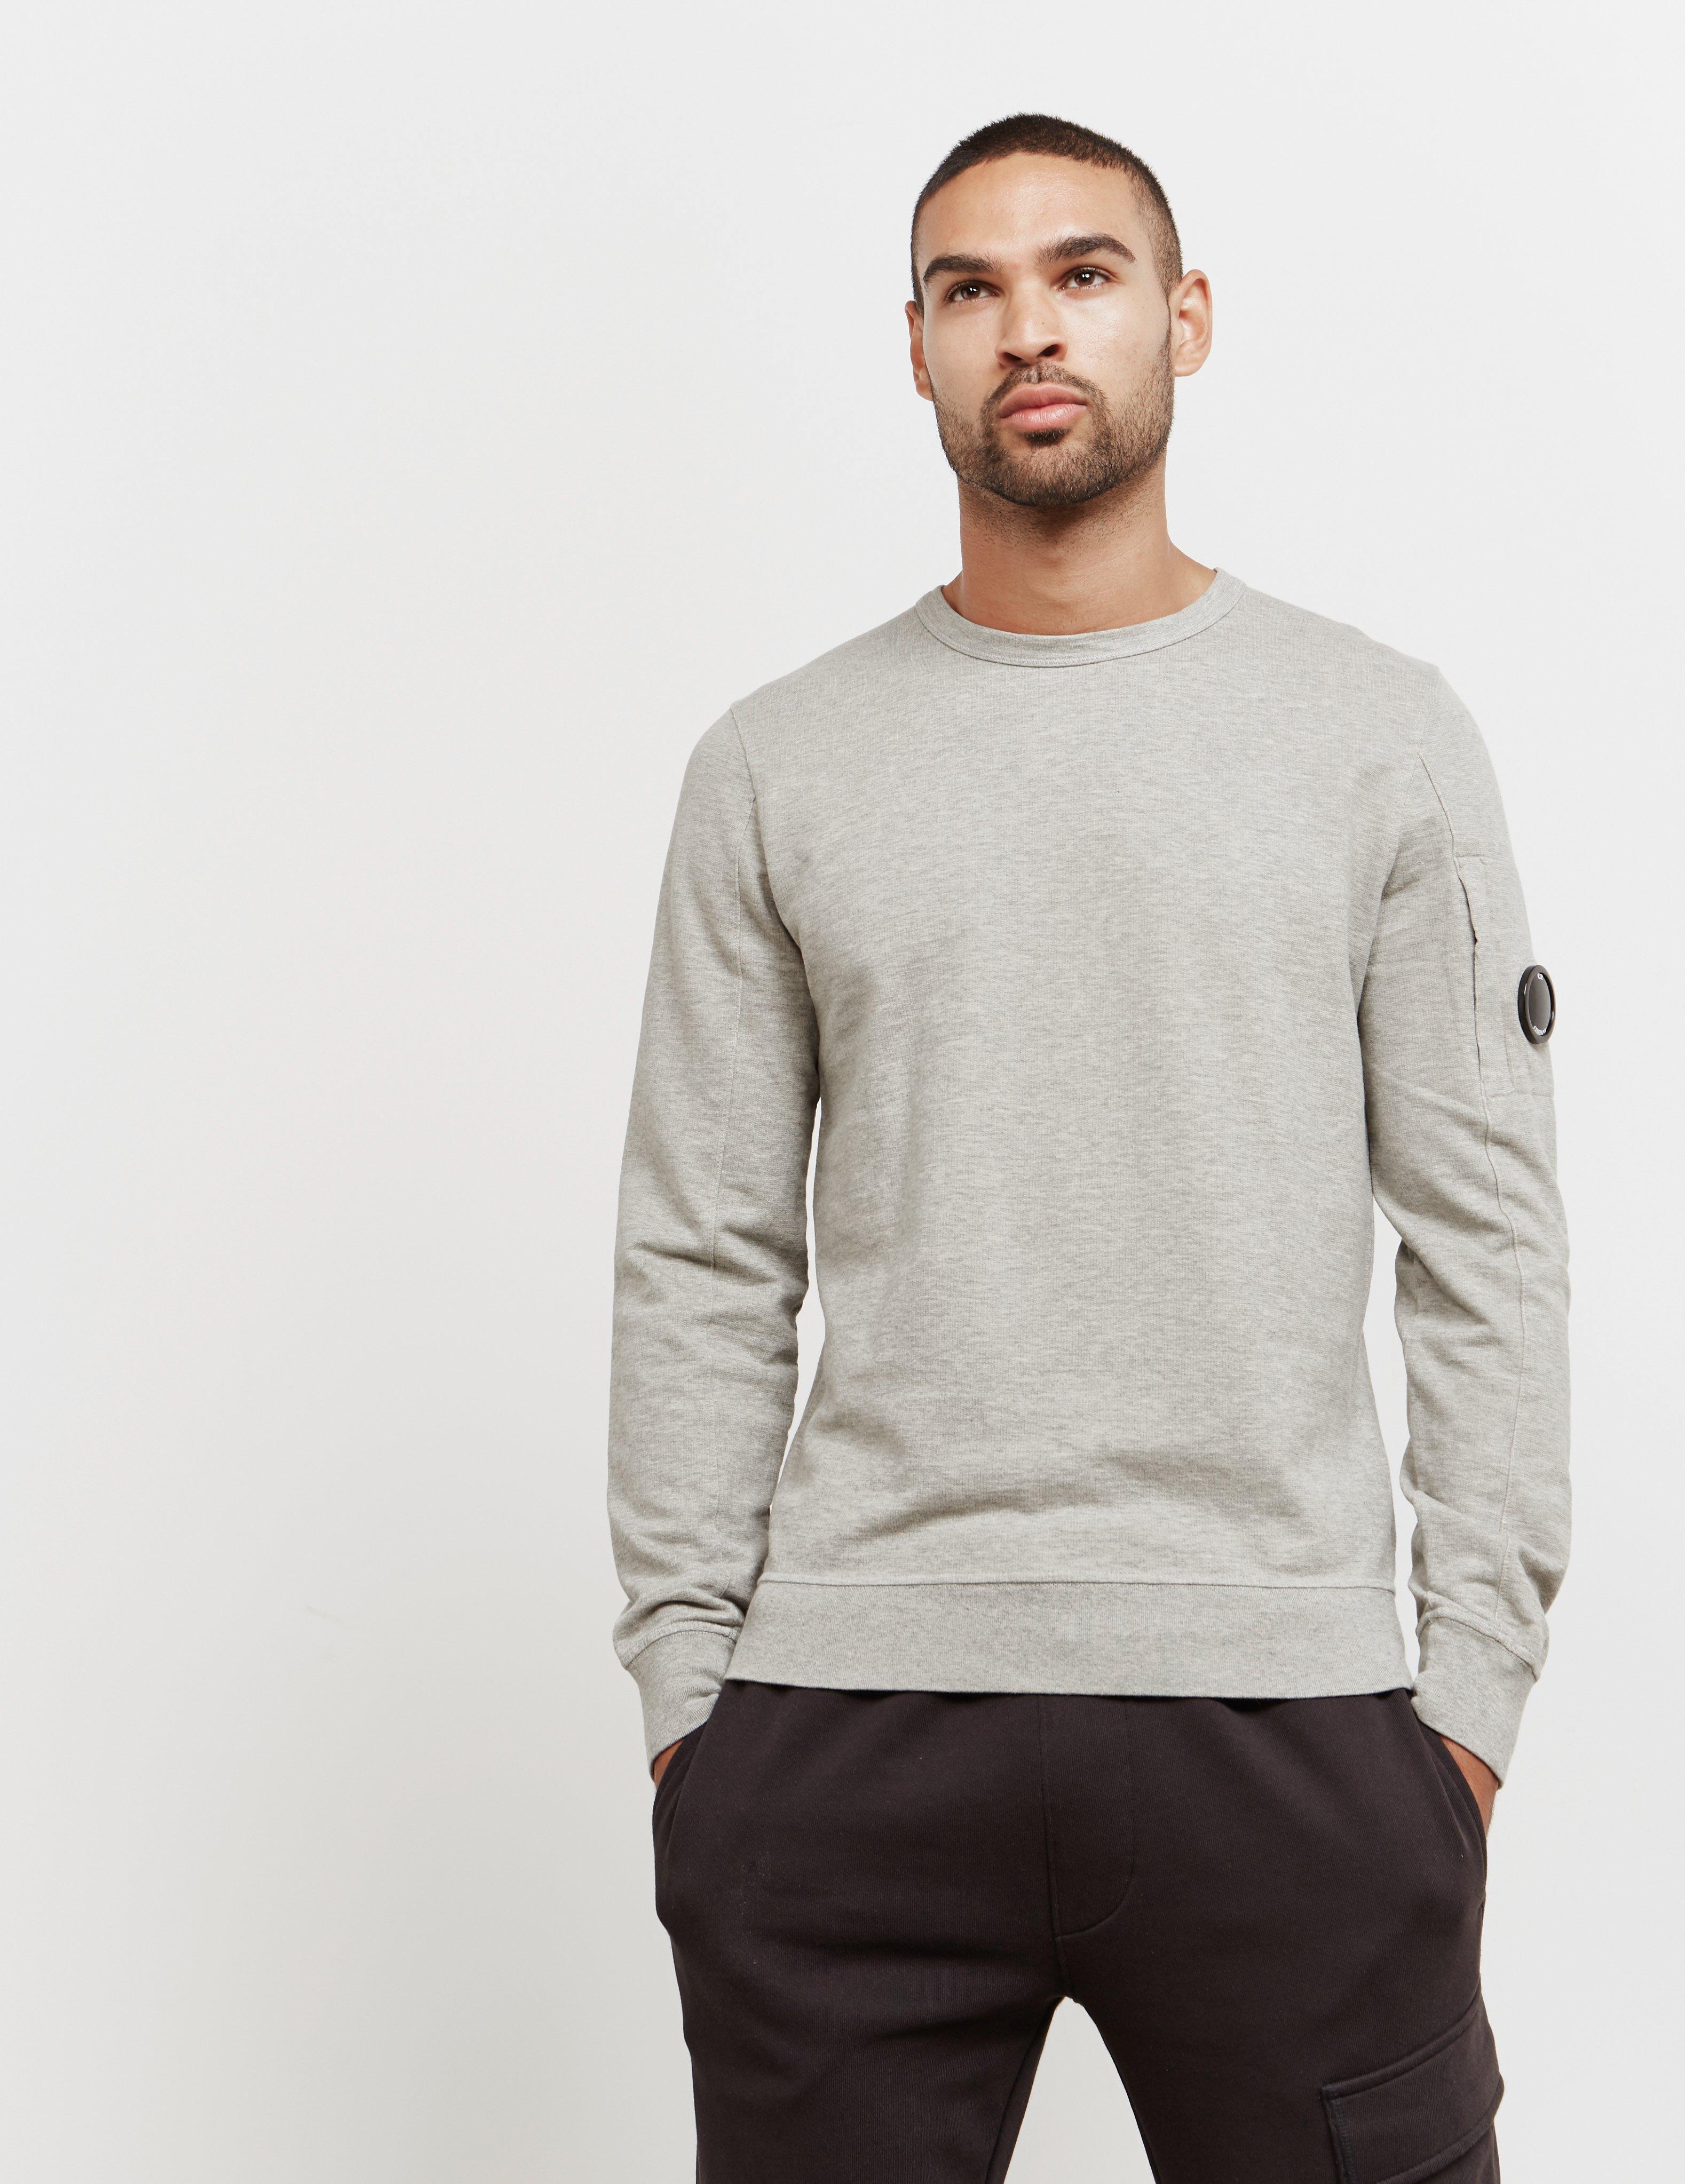 Cp Company Sweatshirt Sale Outlet, 53% OFF | www.velocityusa.com